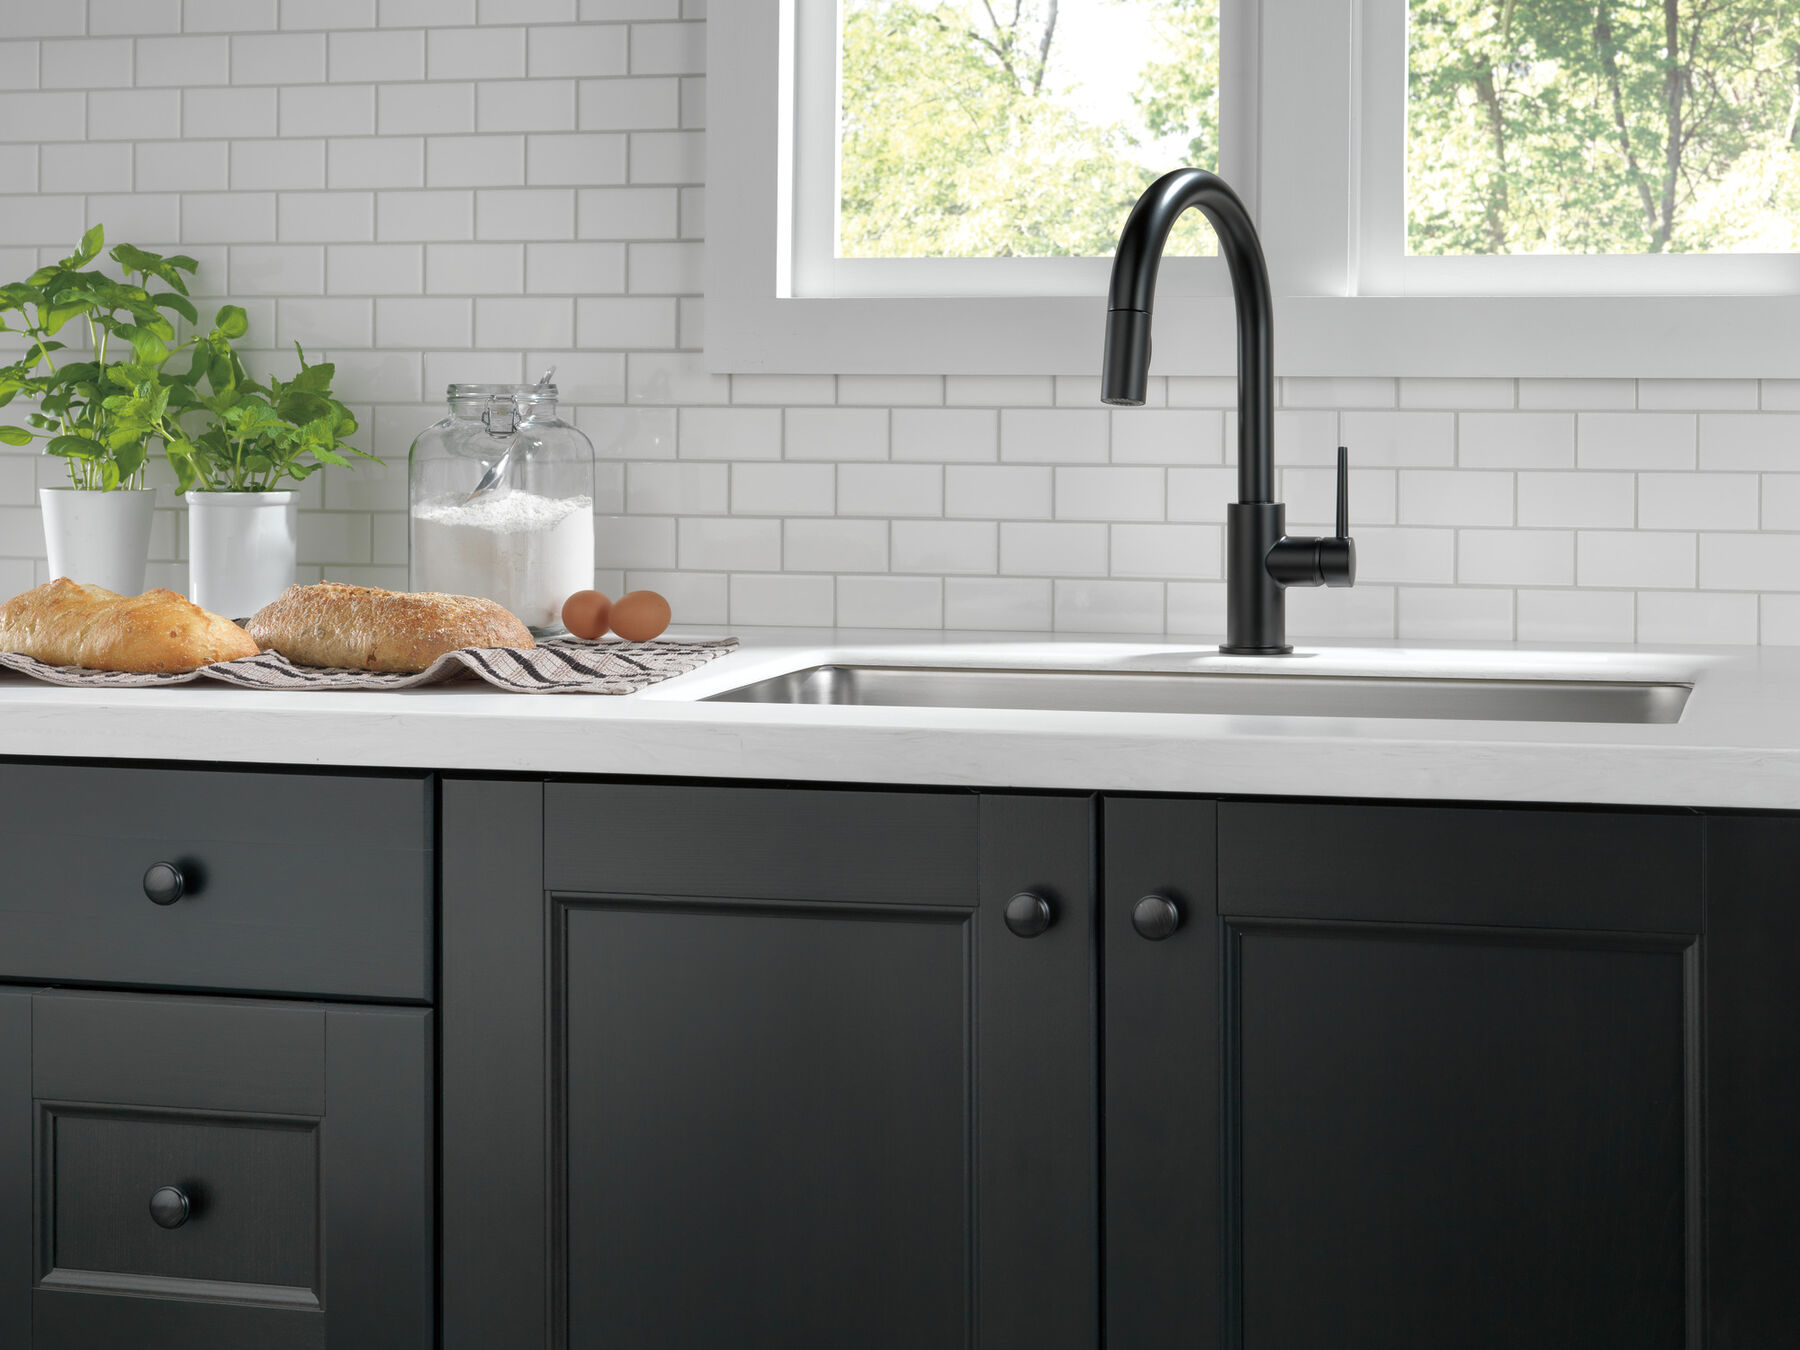 Single Handle Pull Down Kitchen Faucet